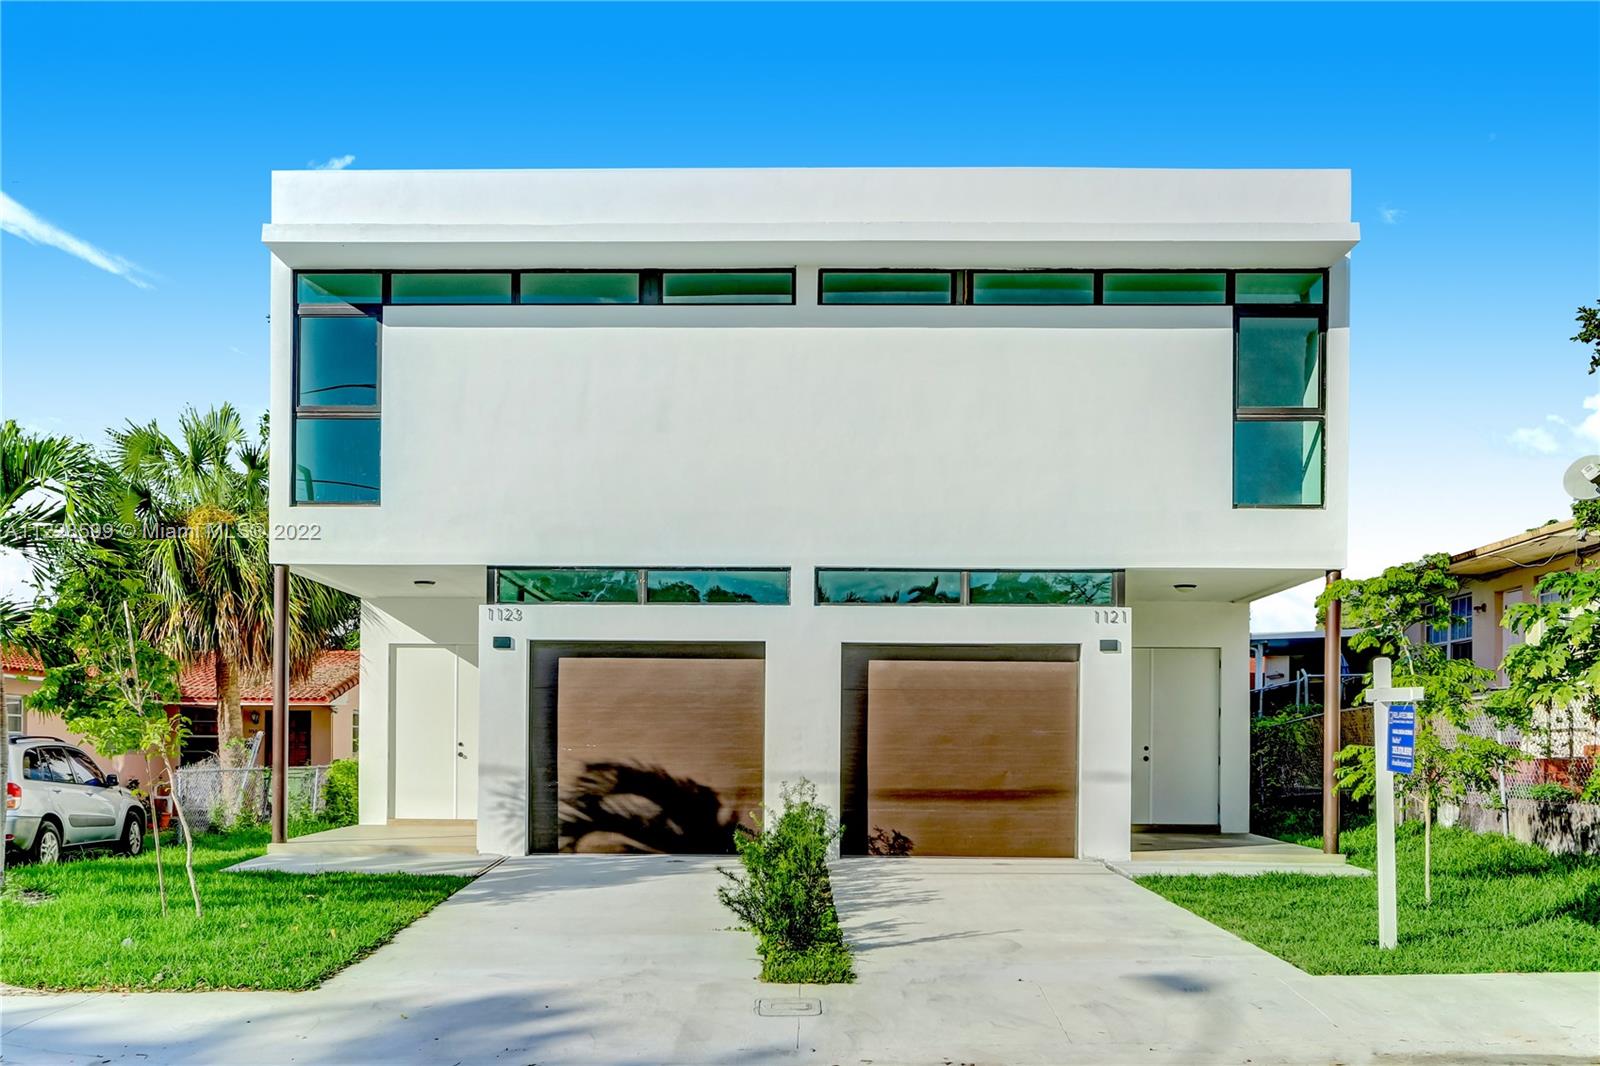 Be the first to live in this new Construction Modern Masterpiece ideally located right off the Roads, within 5 minutes of Brickell and 15 minutes from Coral Gables. This 4 Bedroom, 3.5 Bathroom home boasts 2,840 SqFt of living space with high ceilings, impact windows and endless natural light upon entry. The first floor features an open floor plan concept with a formal dining room that could be used as a den, a large living area with a direct access to the backyard, a chef's kitchen with eat-in bar and a seamless flow between the indoor and outdoor spaces. The 4 bedrooms are conveniently located on the second floor. The master suite includes a tub, oversized shower and walk in closet. Property is fenced and has an electric gate. No Association. Seller is willing to build a pool.